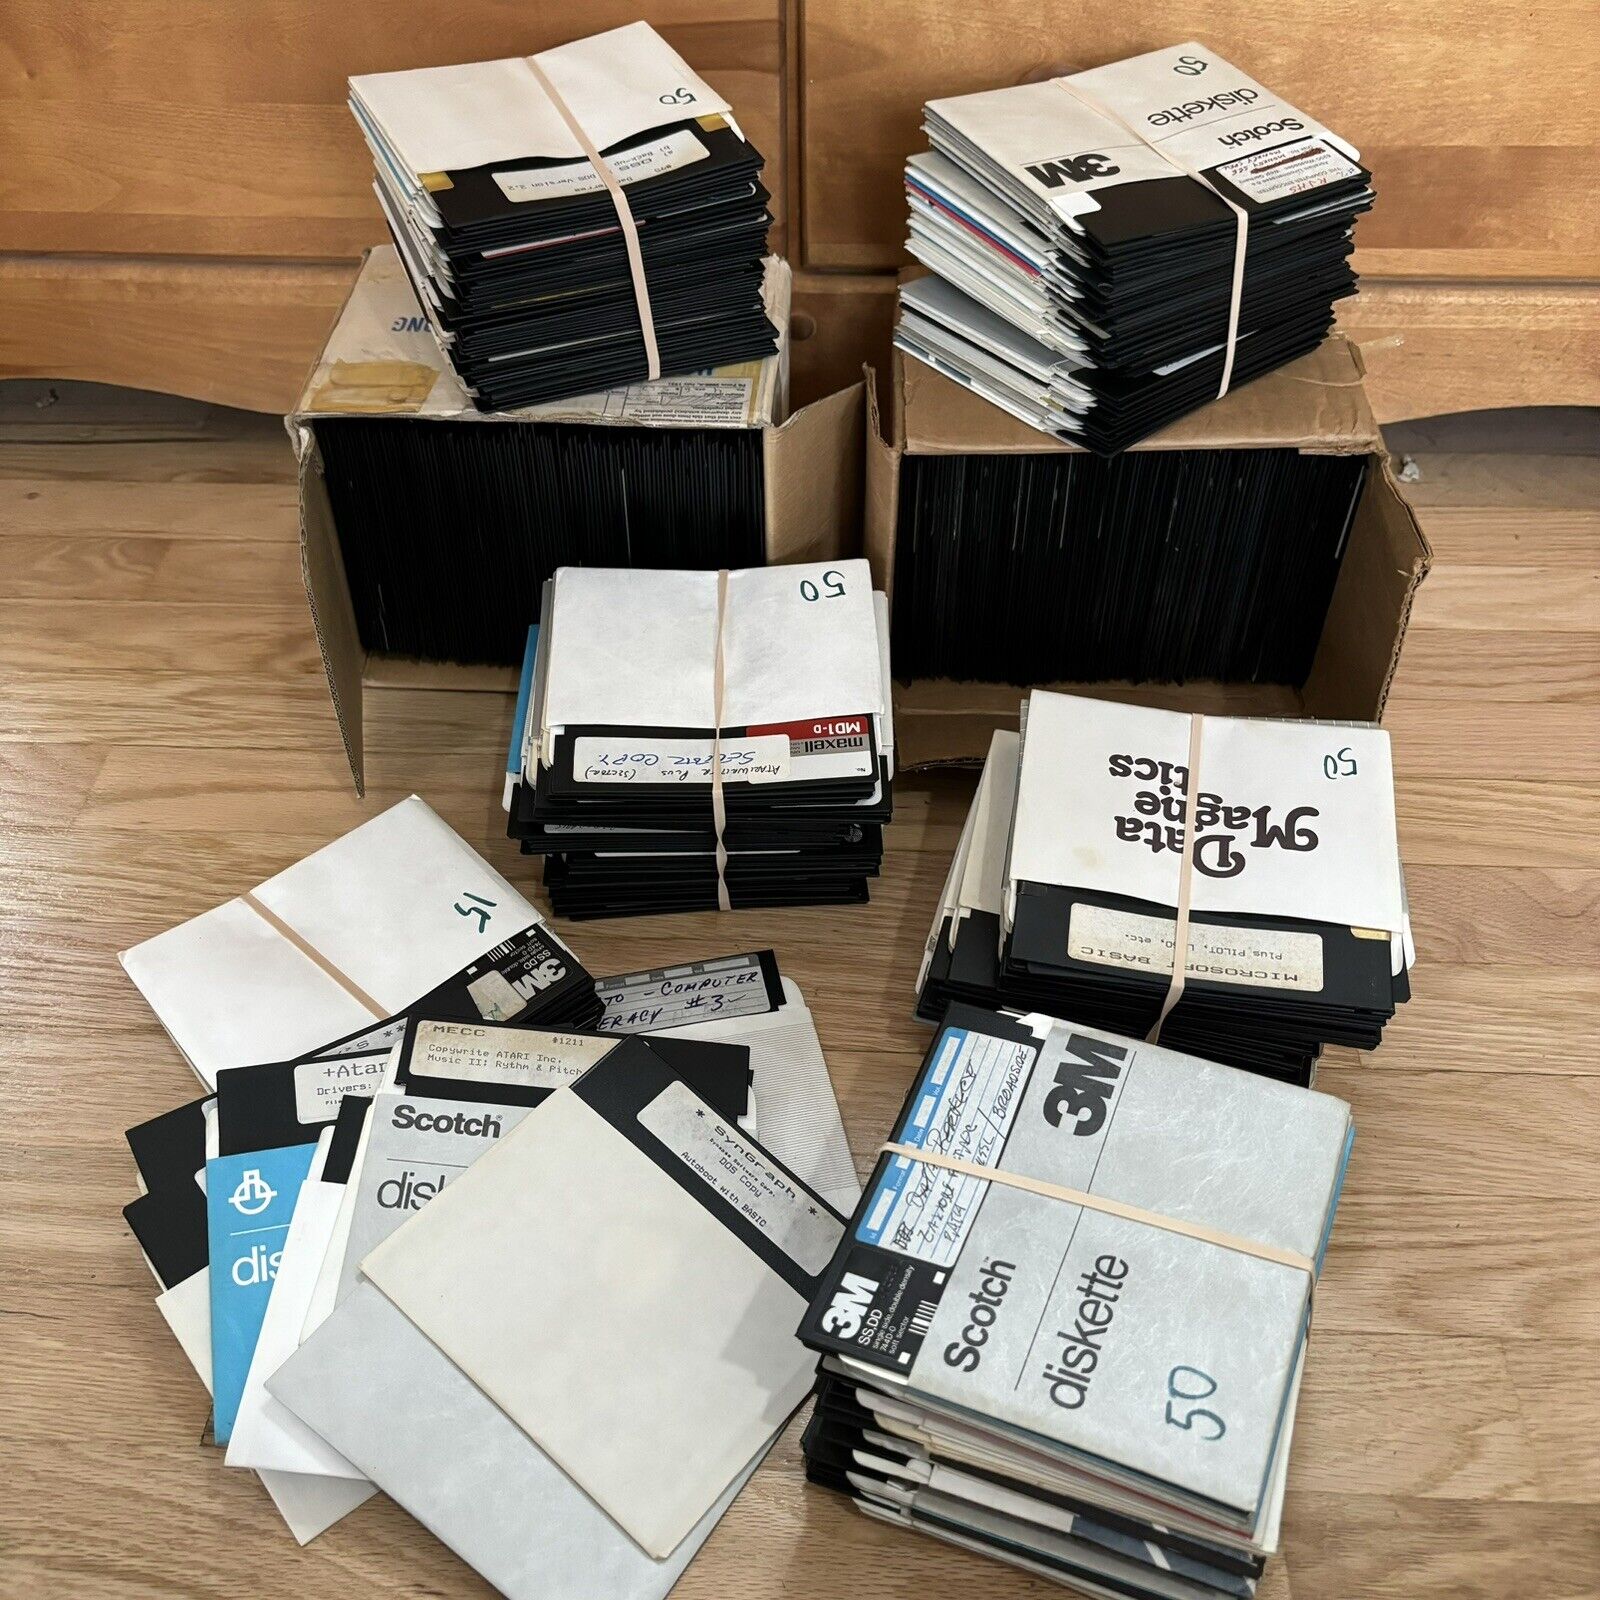 USED Vintage Lot of 465+ 5.25 Floppy Disks 400 800 800XL - Sold As Blank